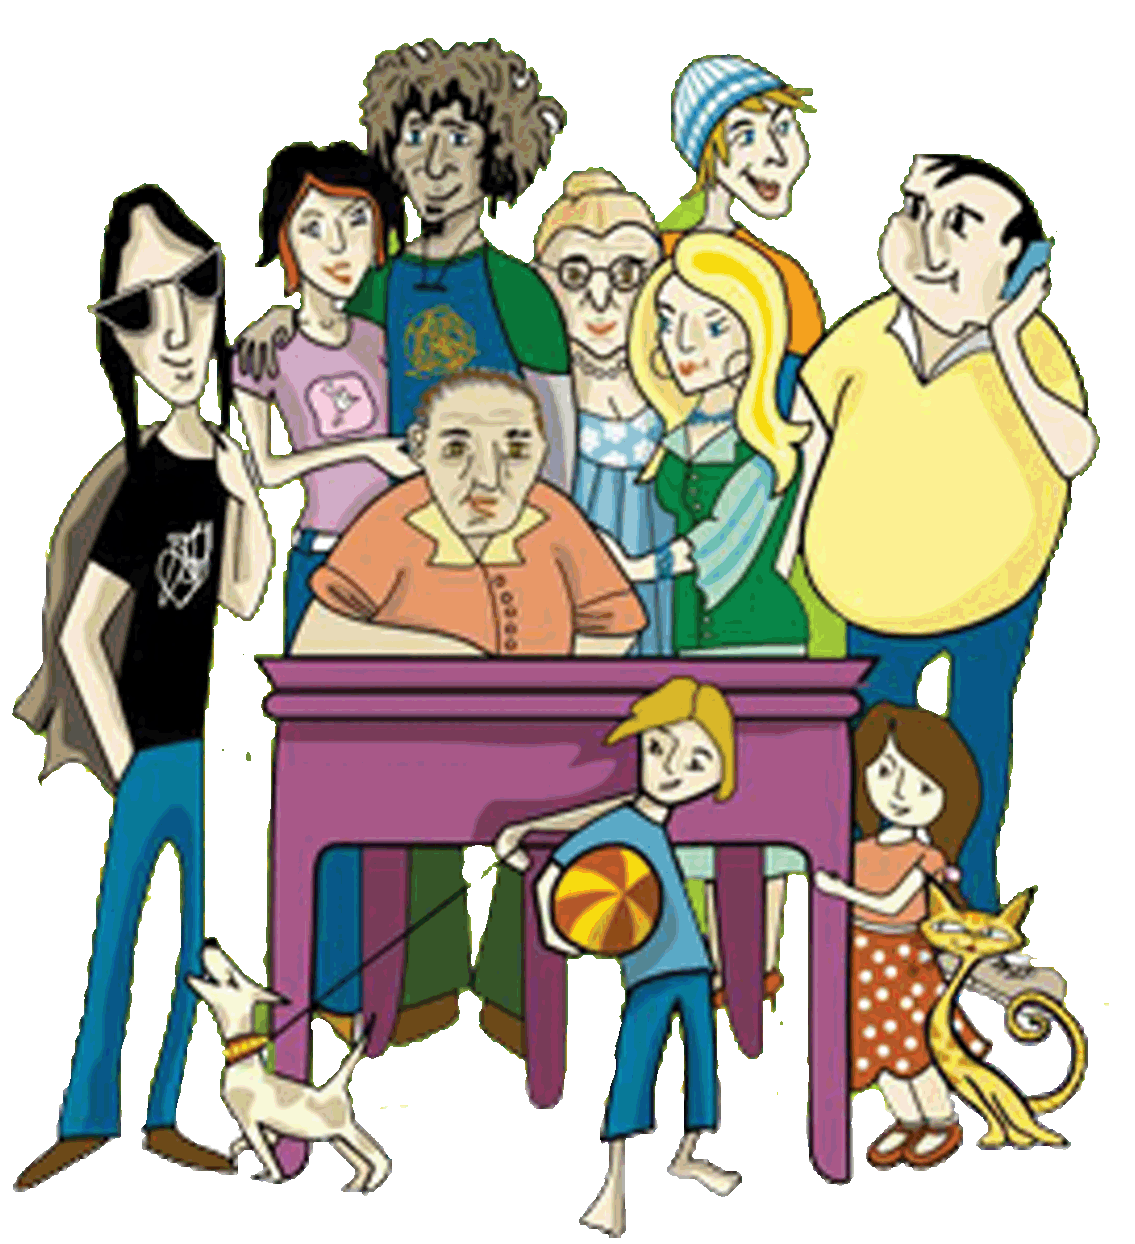 Debate clipart kid discussion. Collection of free distraining